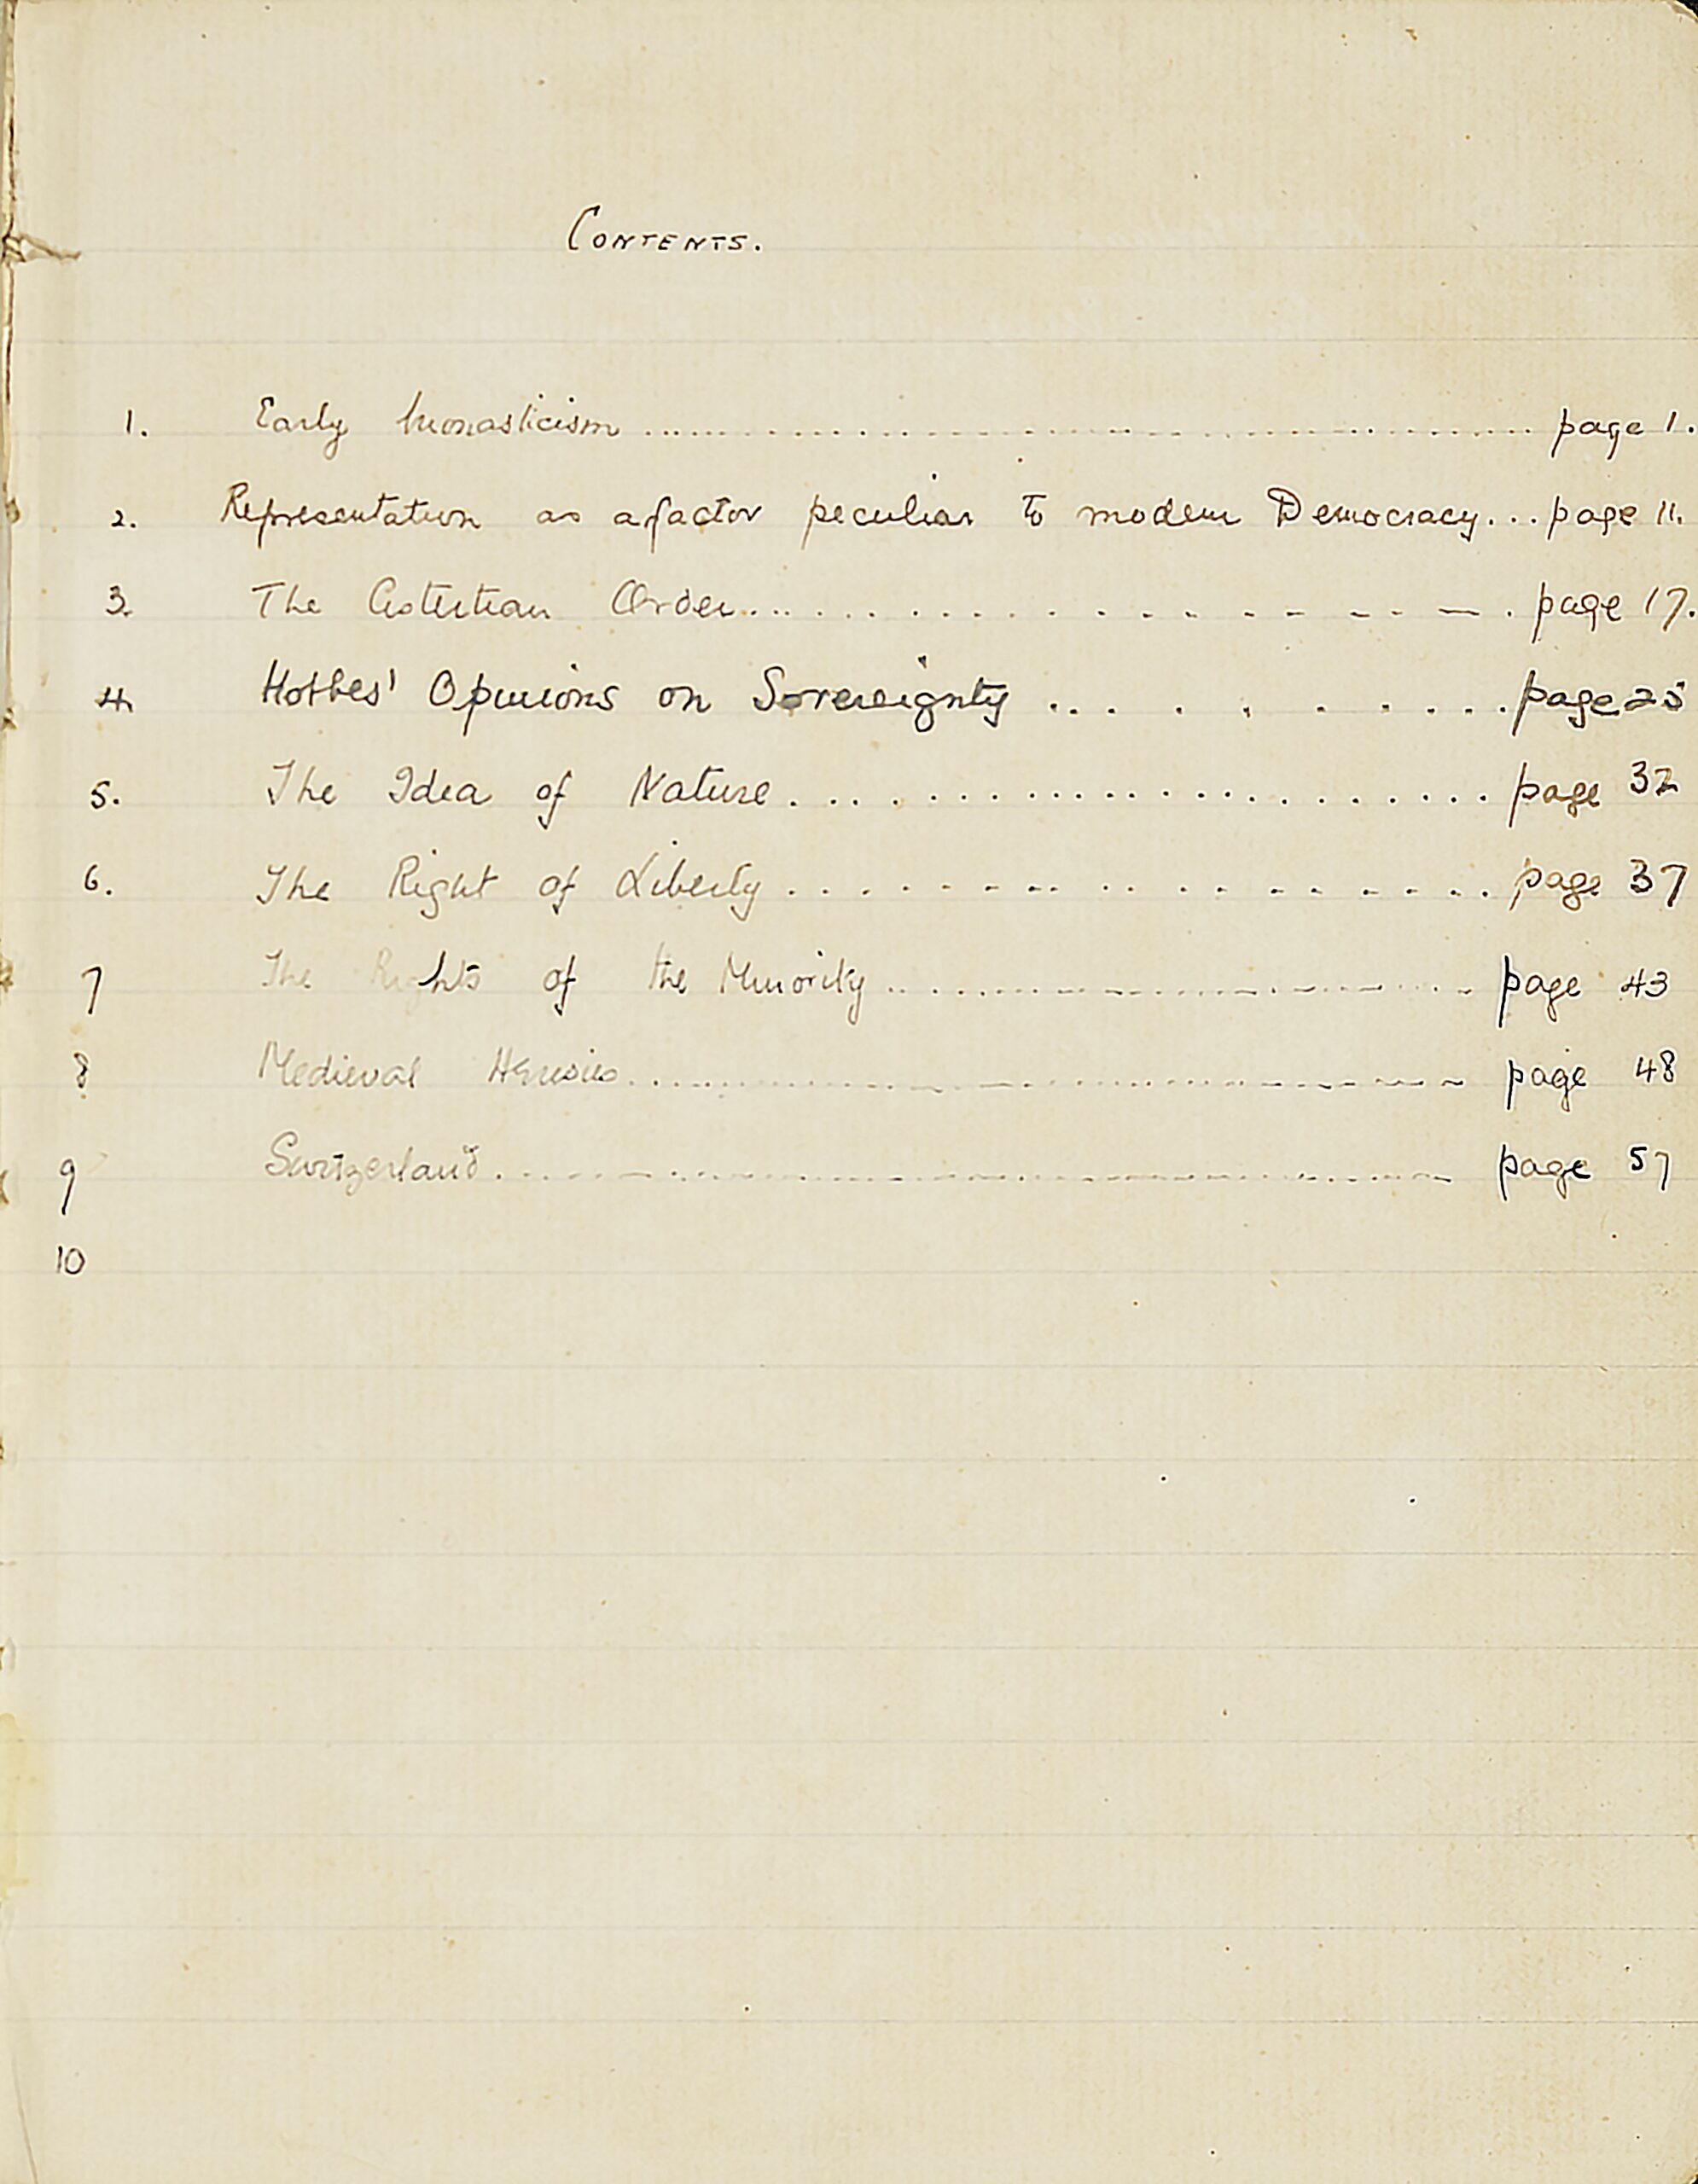 Handwritten contents page of K.B. McFarlane's school History notebook. 9 essays are listed, including "the idea of nature" and "the right of liberty."